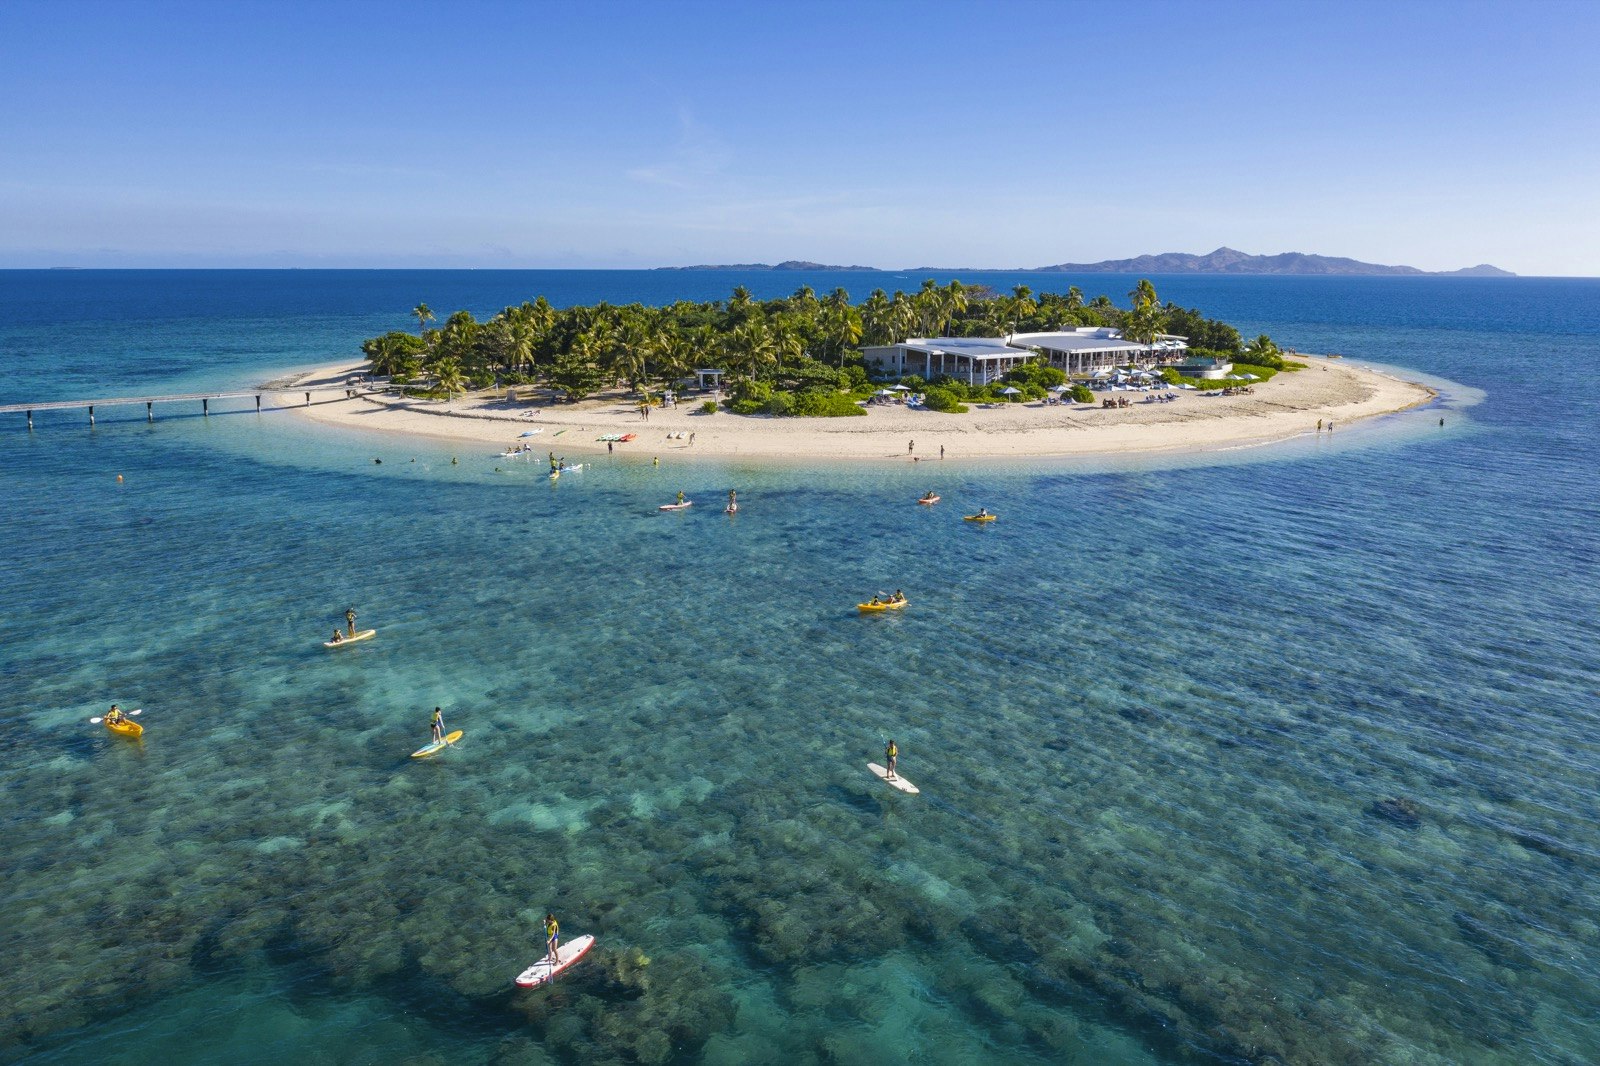 An aerial photo of a resort on an island with people practicing water sports